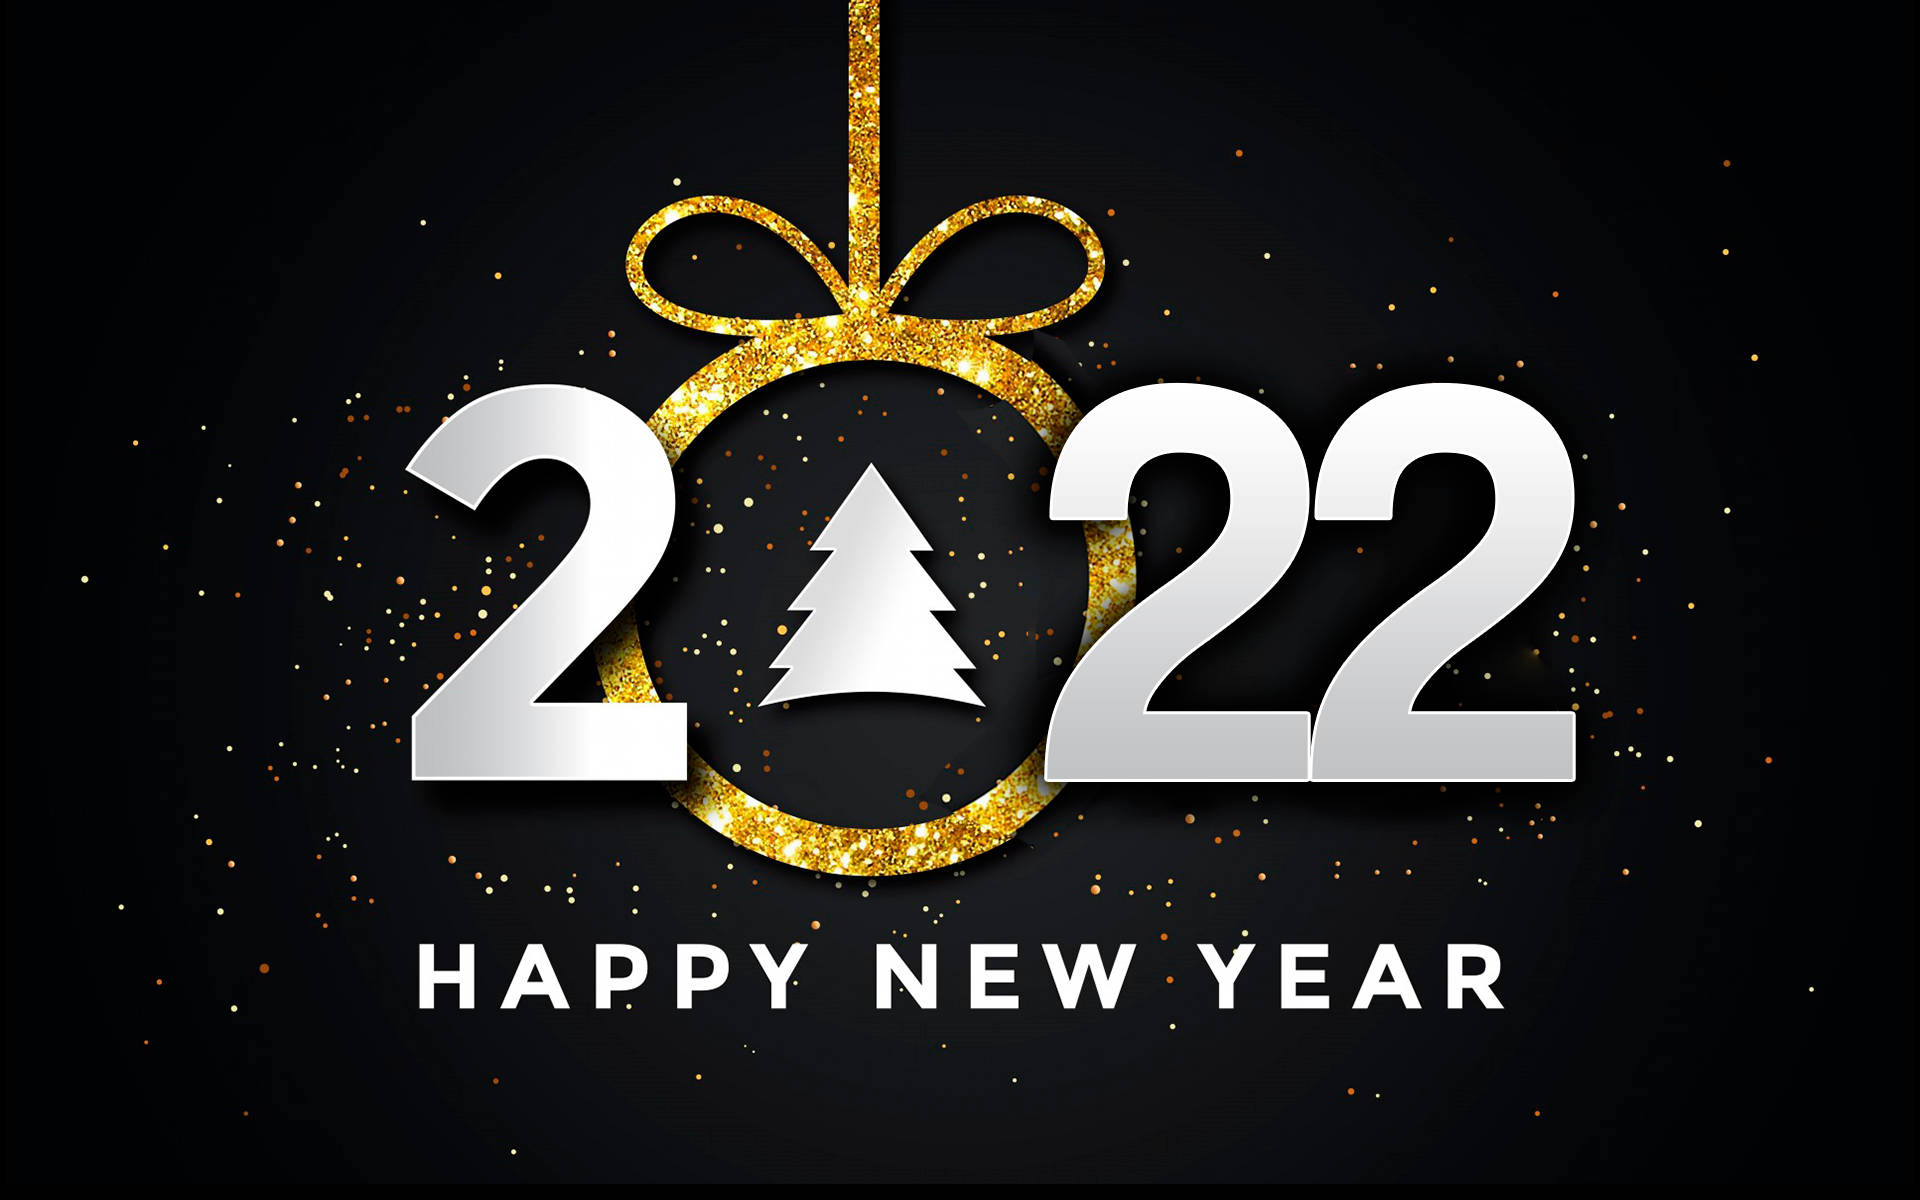 Happy New Year 2022 Tree Ornament Background